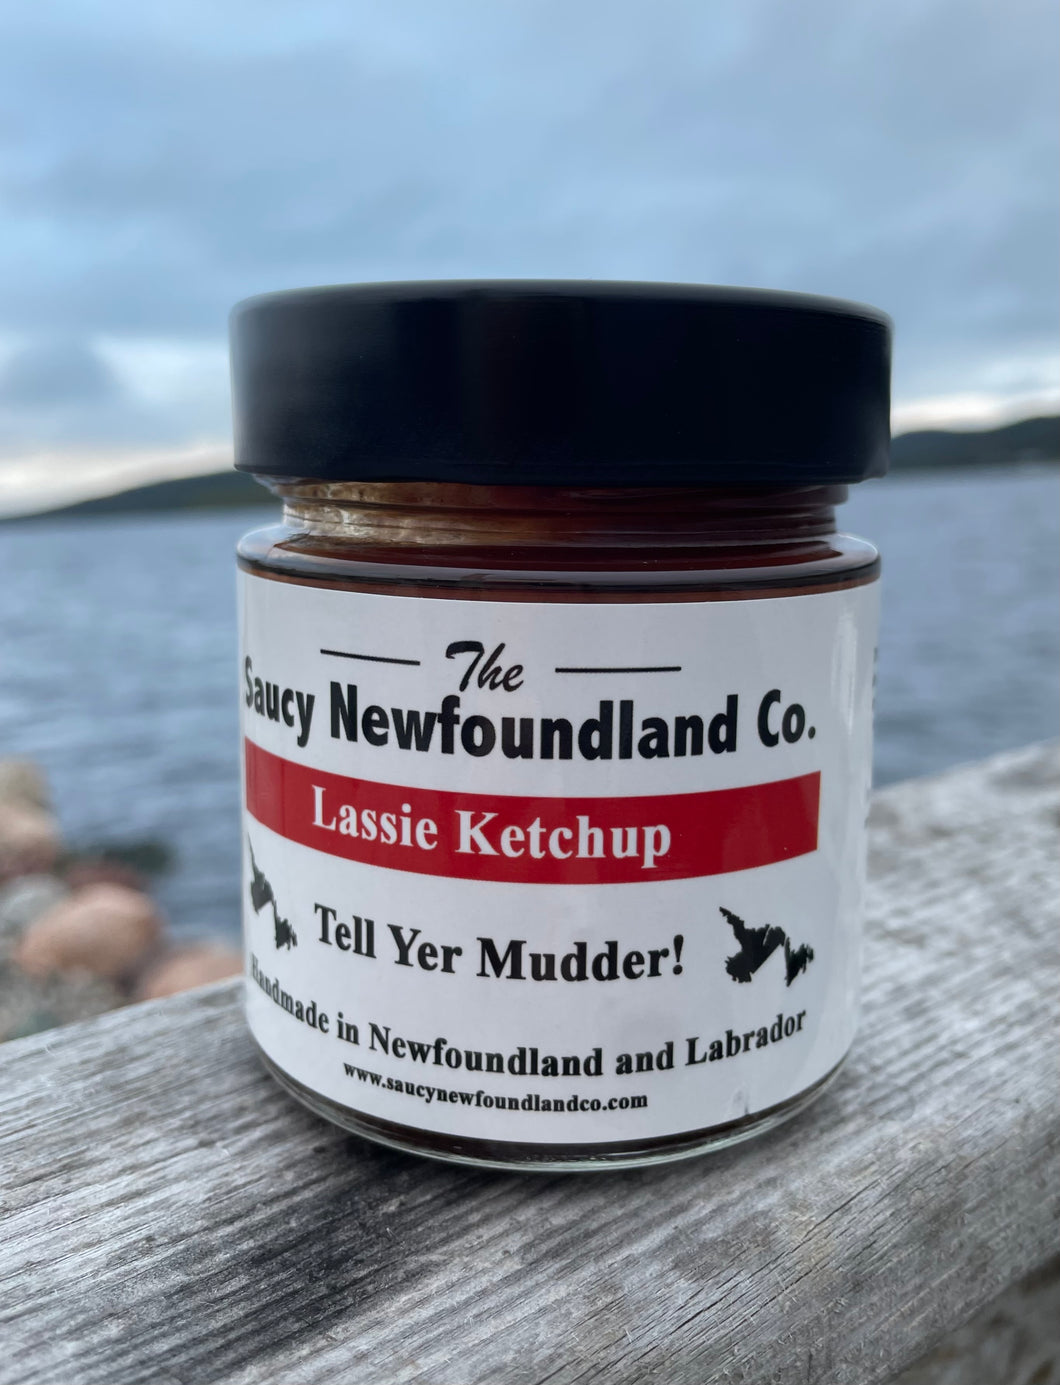 Lassie Ketchup - The Saucy Newfoundland Co.